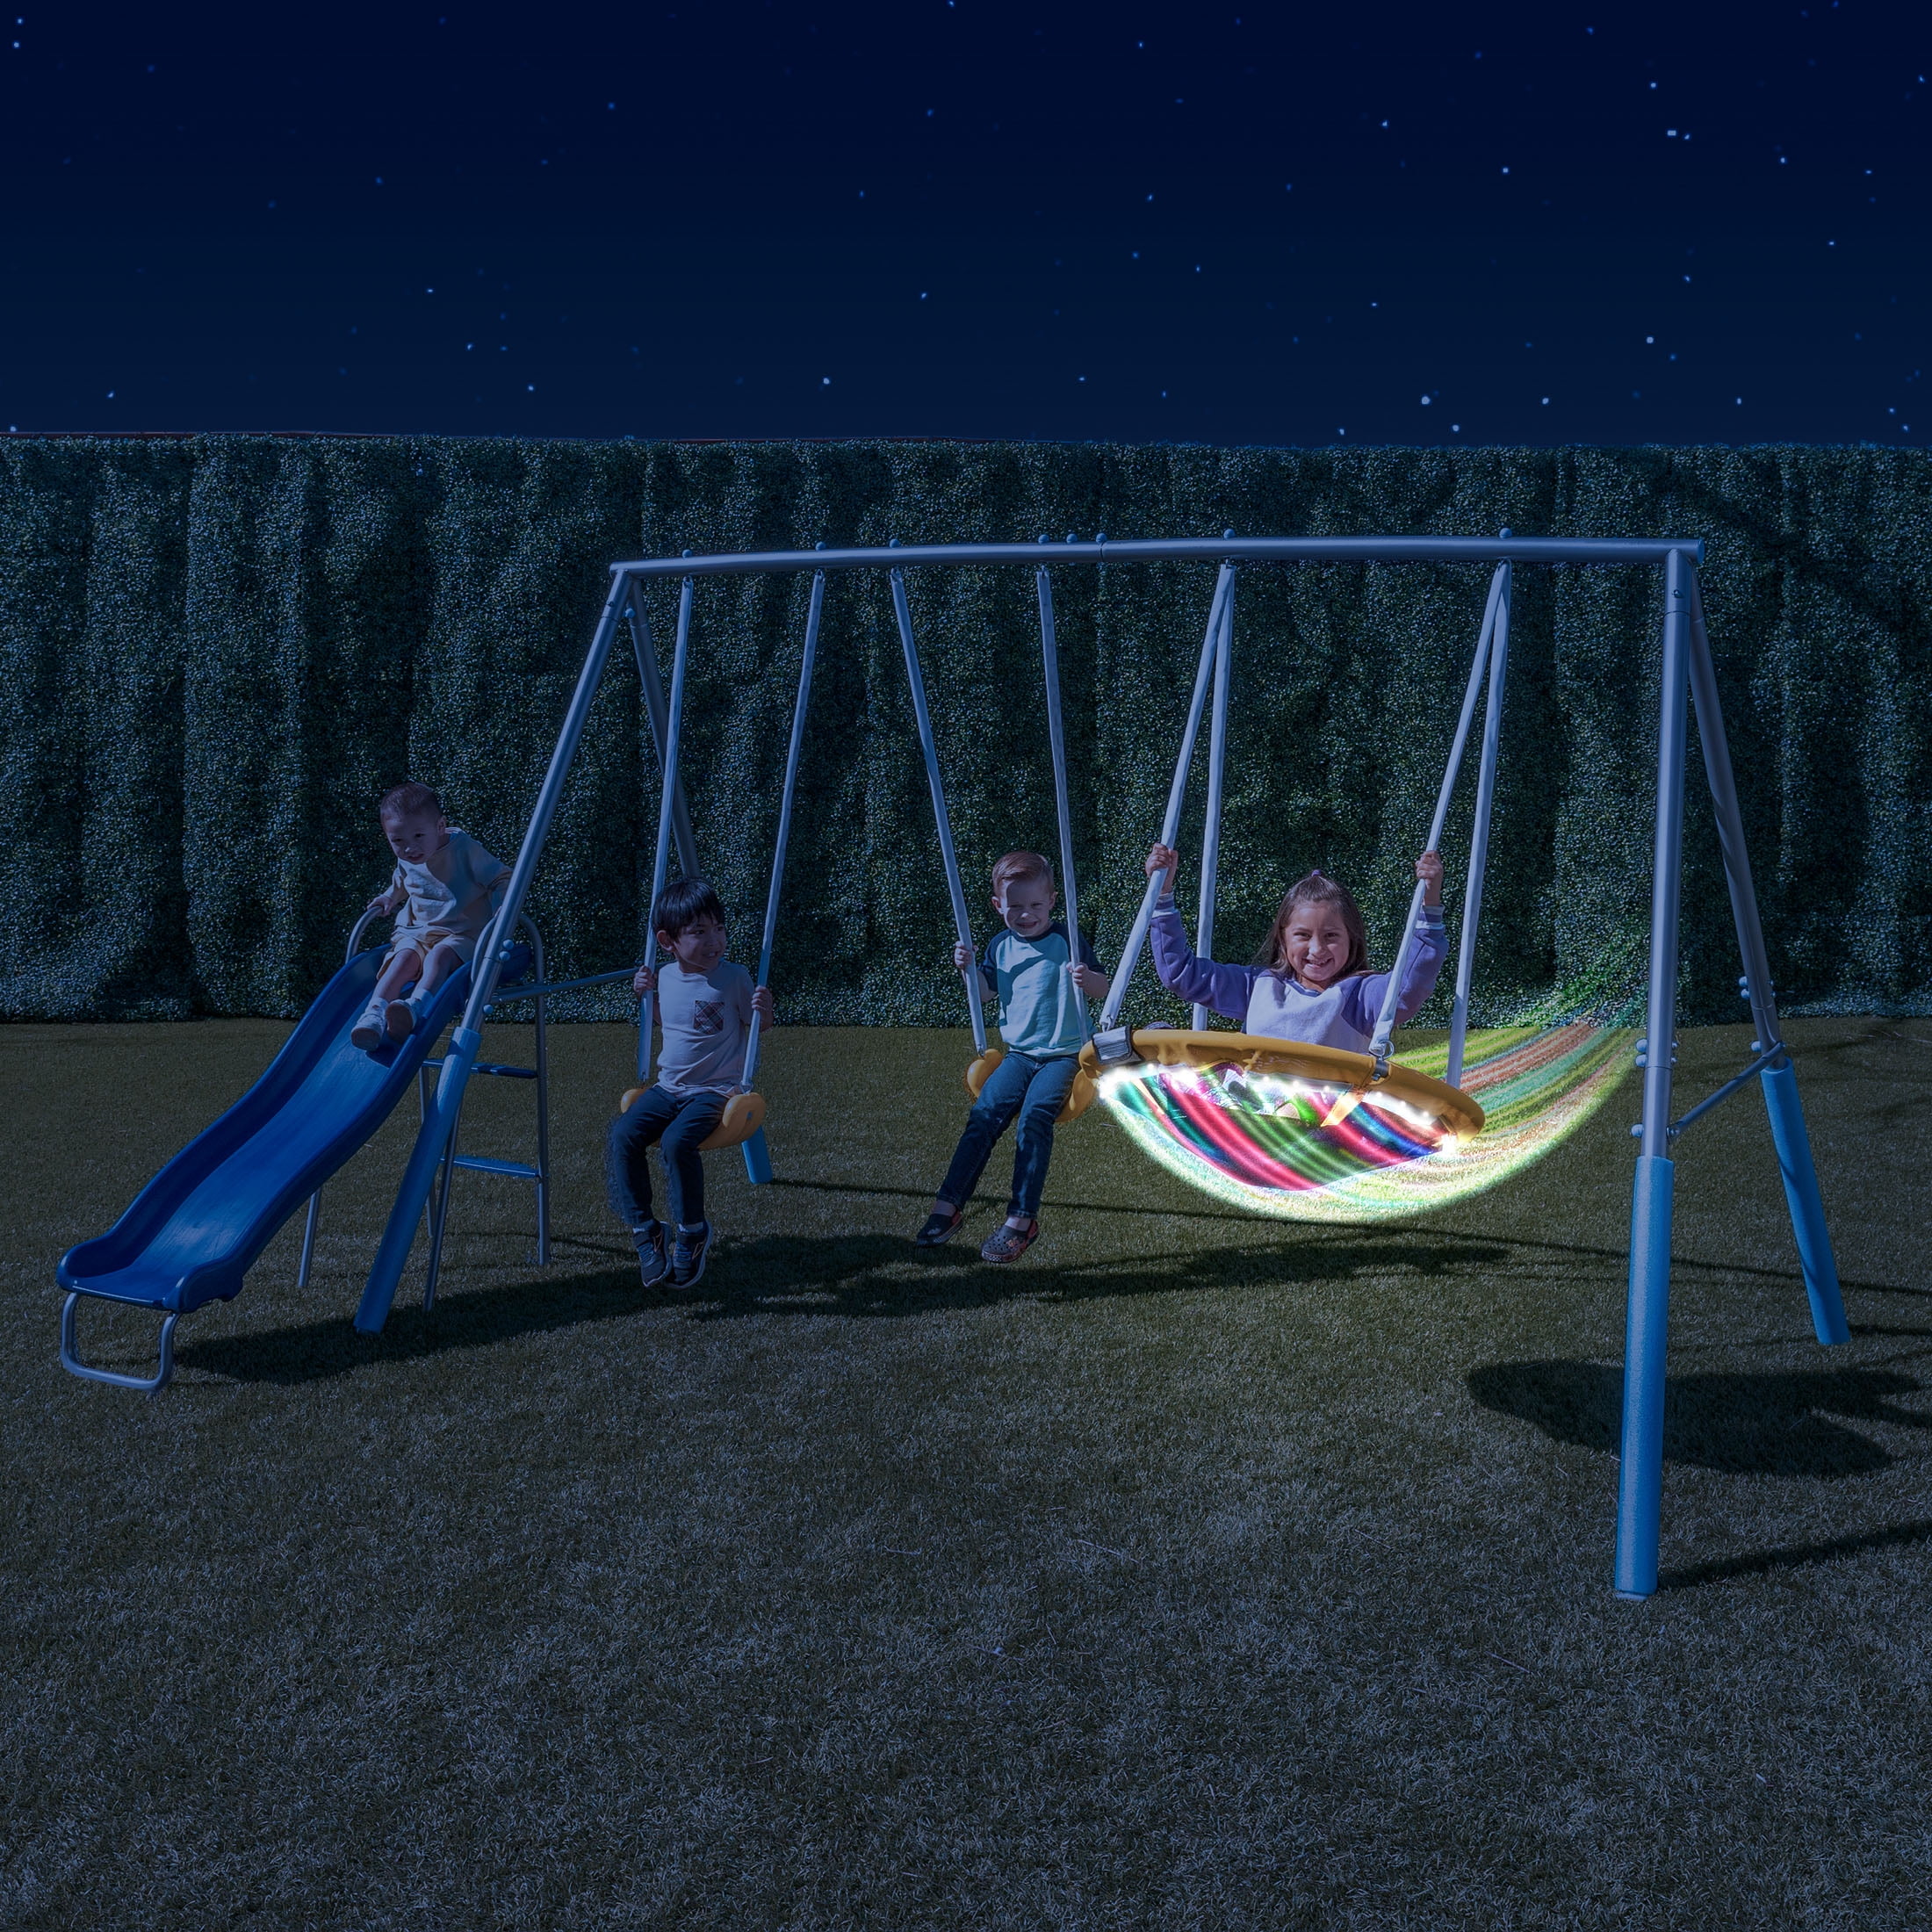 Sportspower Comet Metal Swing Set with LED Light up Saucer Swing - 1